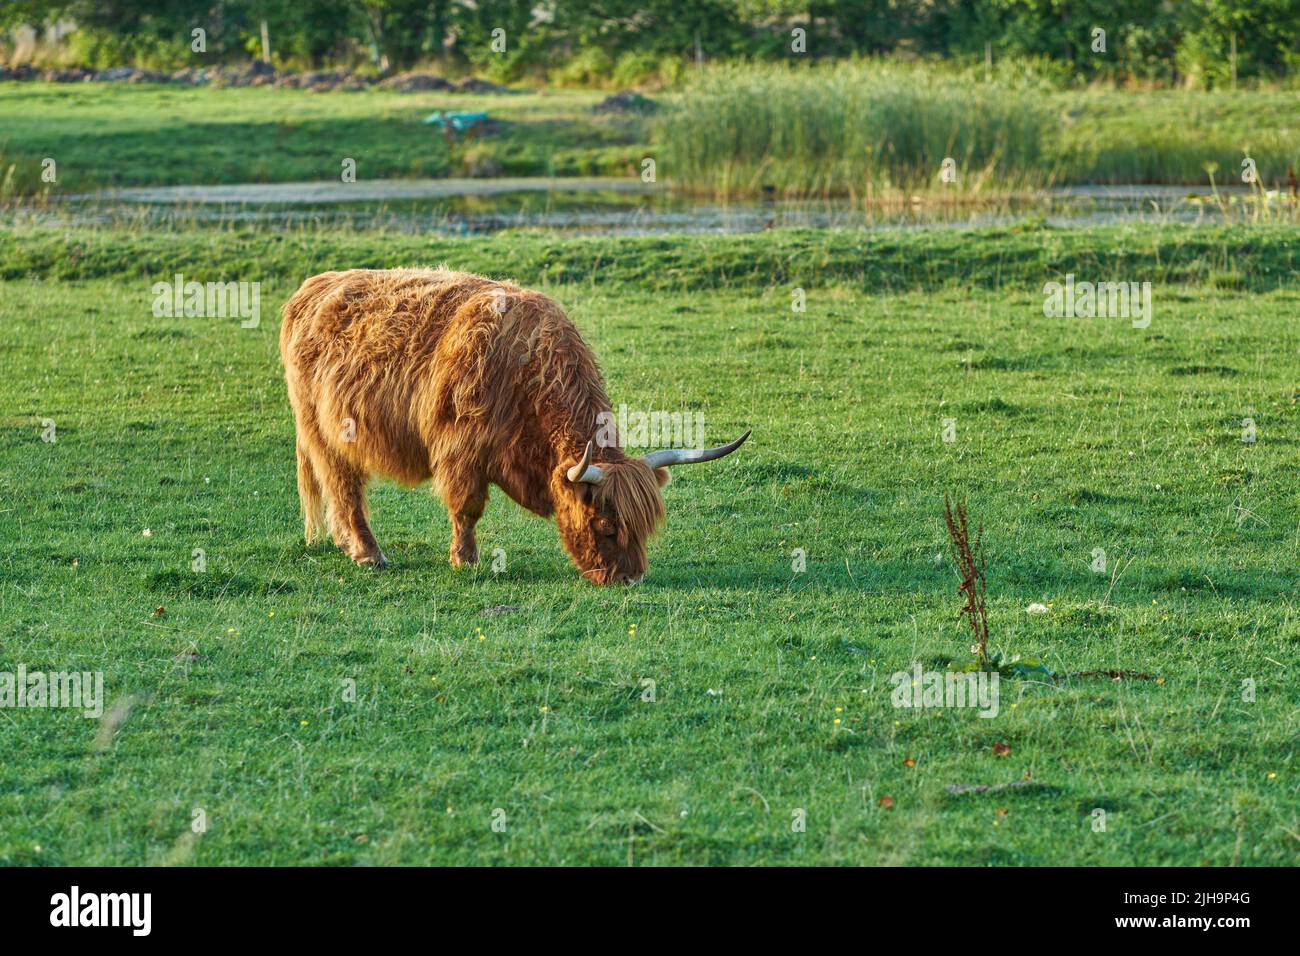 Grass fed Highland cow on farm pasture, grazing and raised for dairy, meat or beef industry. Full length of hairy cattle animal standing alone on Stock Photo